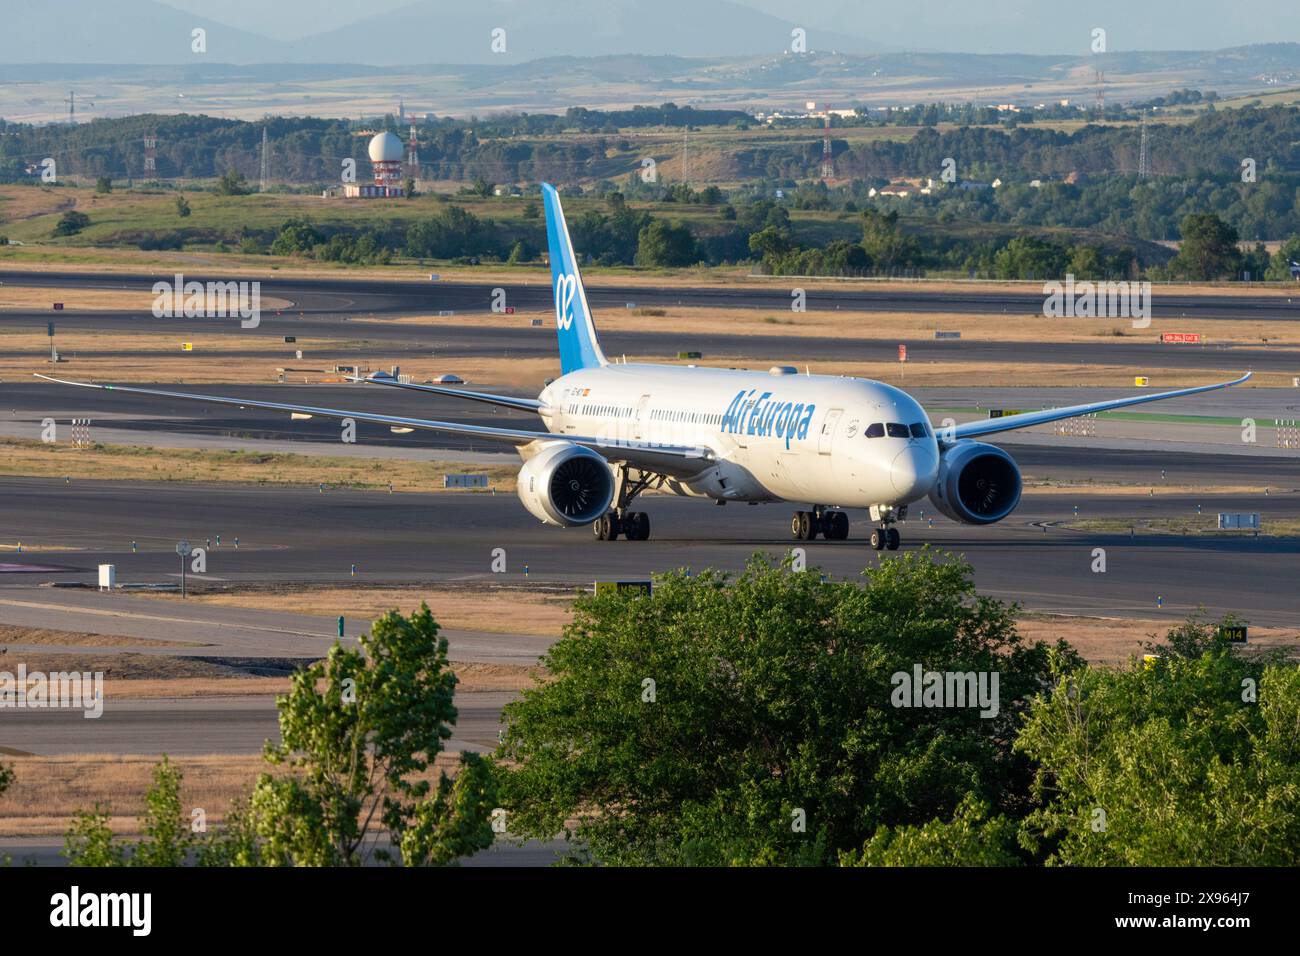 Boeing 787 airliner of the Air Europa airline at Madrid Barajas airport Stock Photo